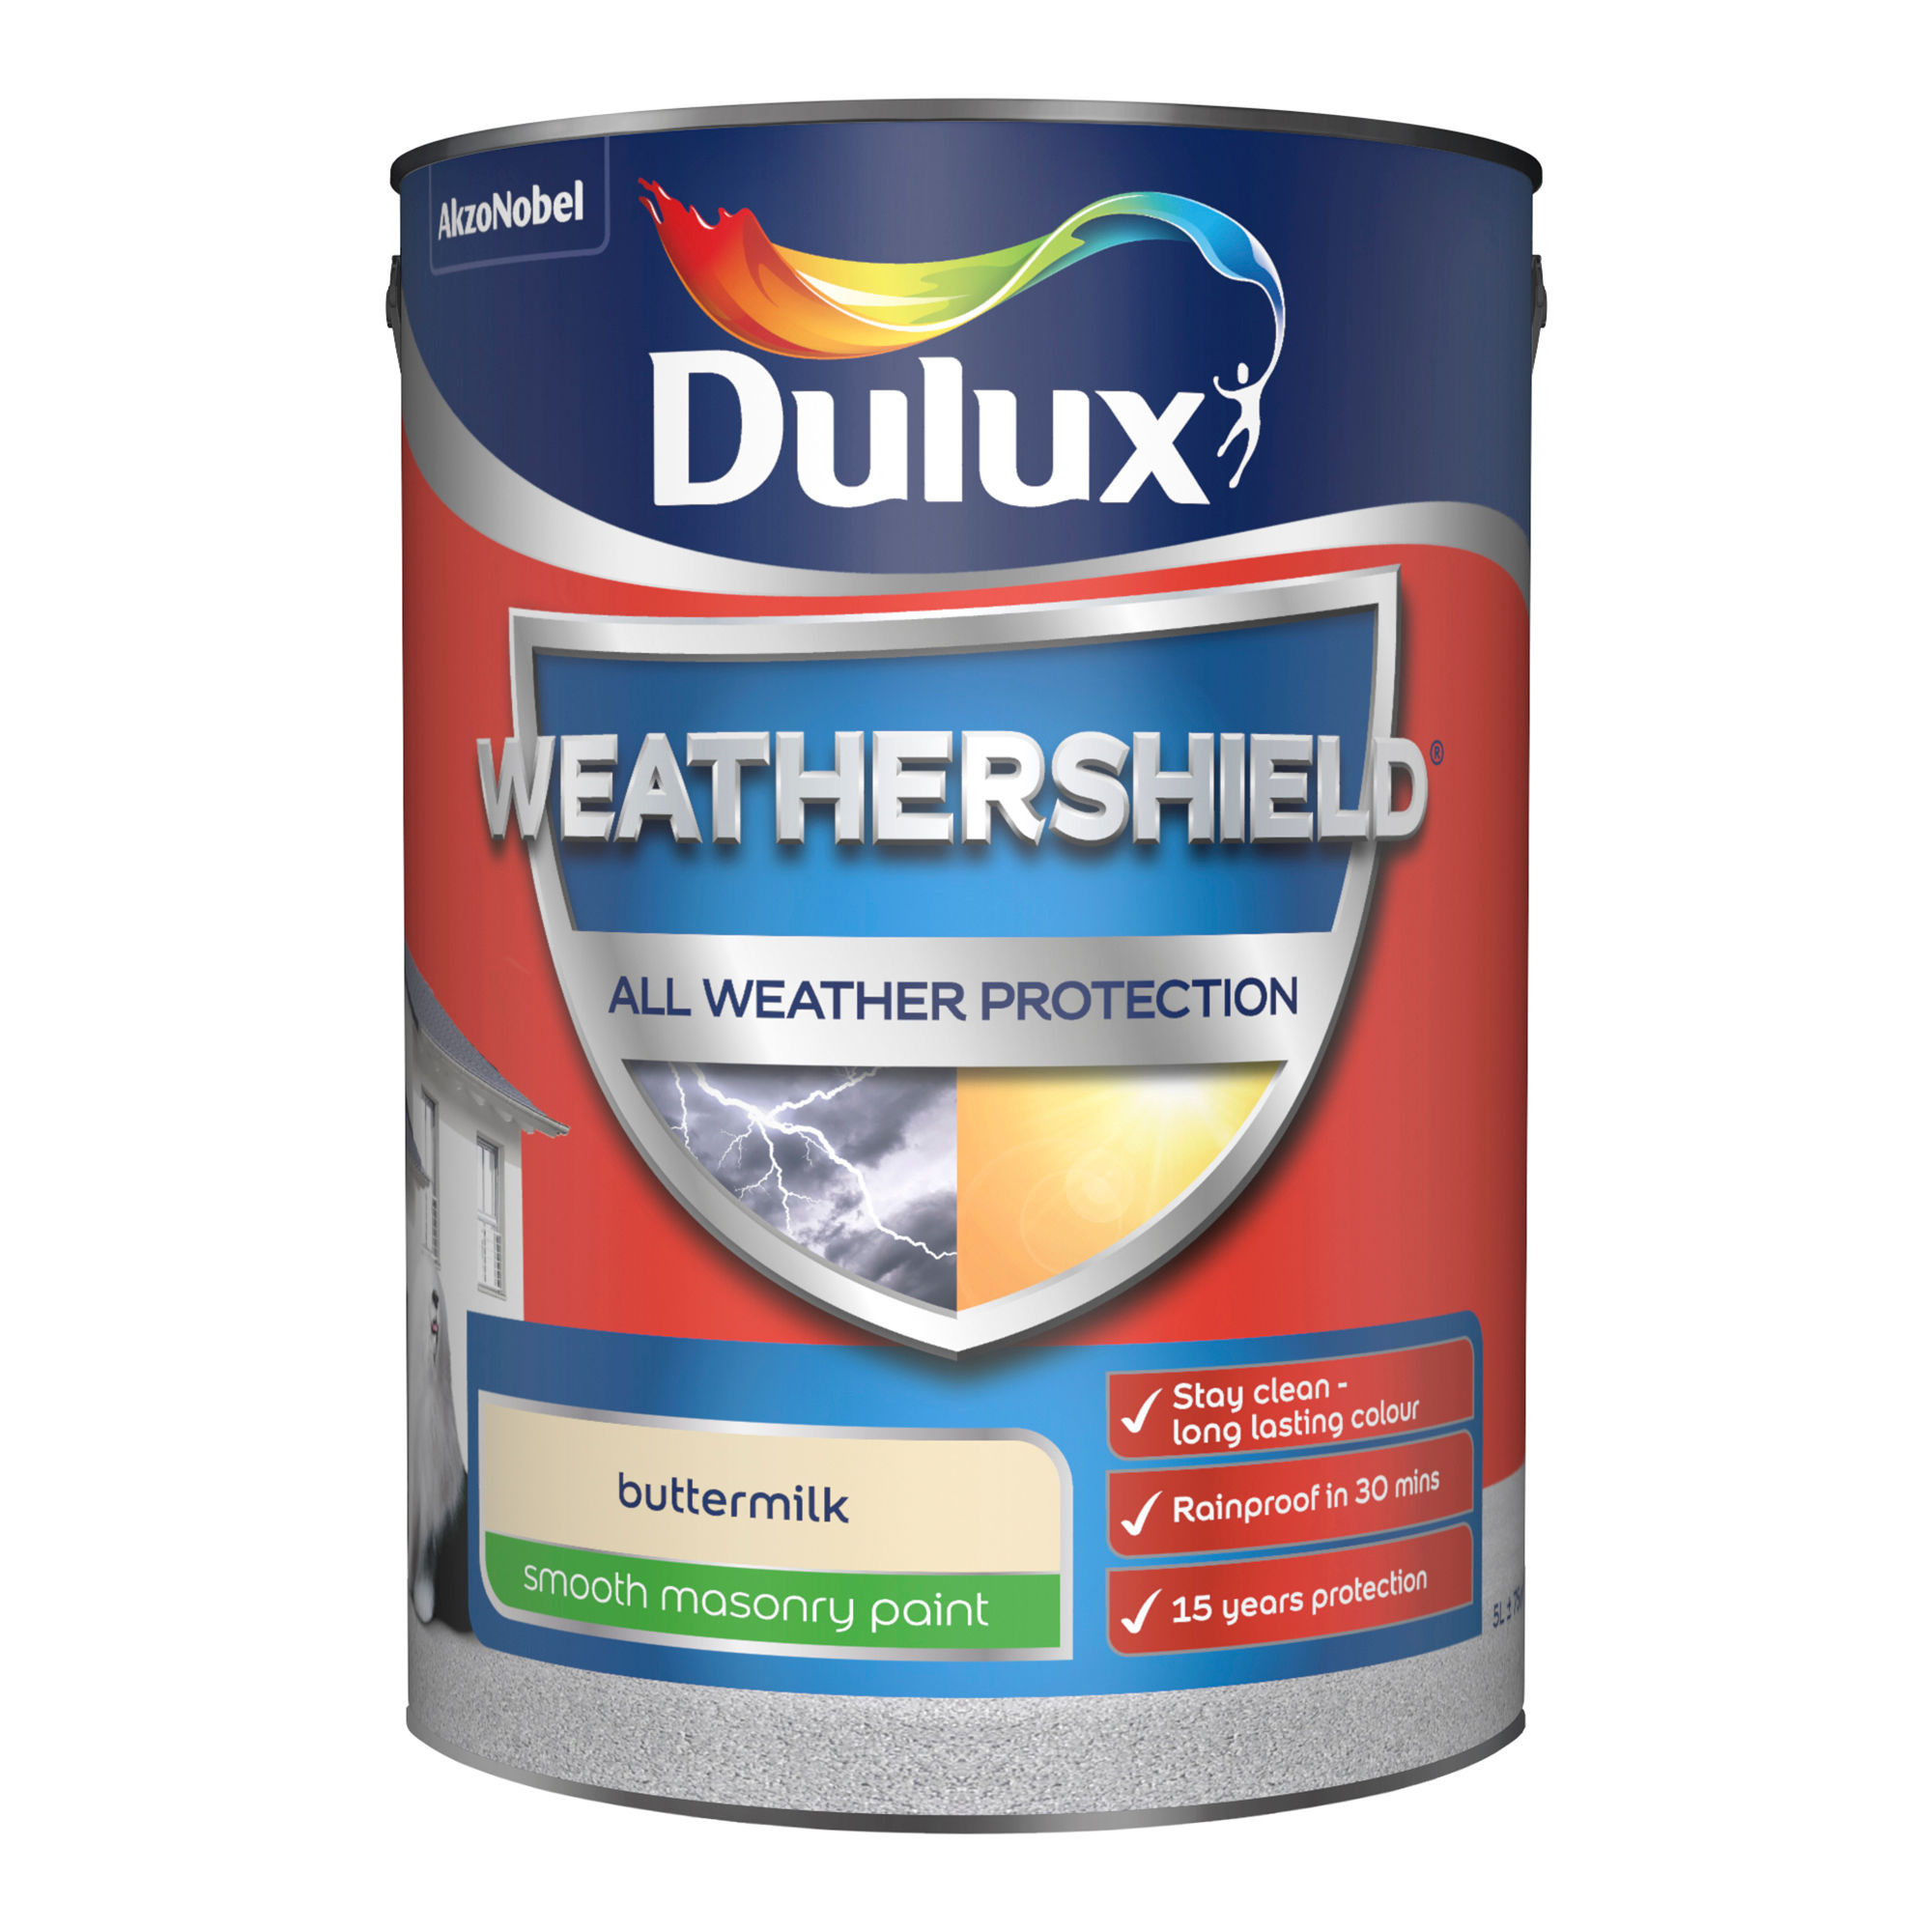 Dulux Weathershield All Weather Protection Smooth Masonry Paint - Buttermilk (5L)